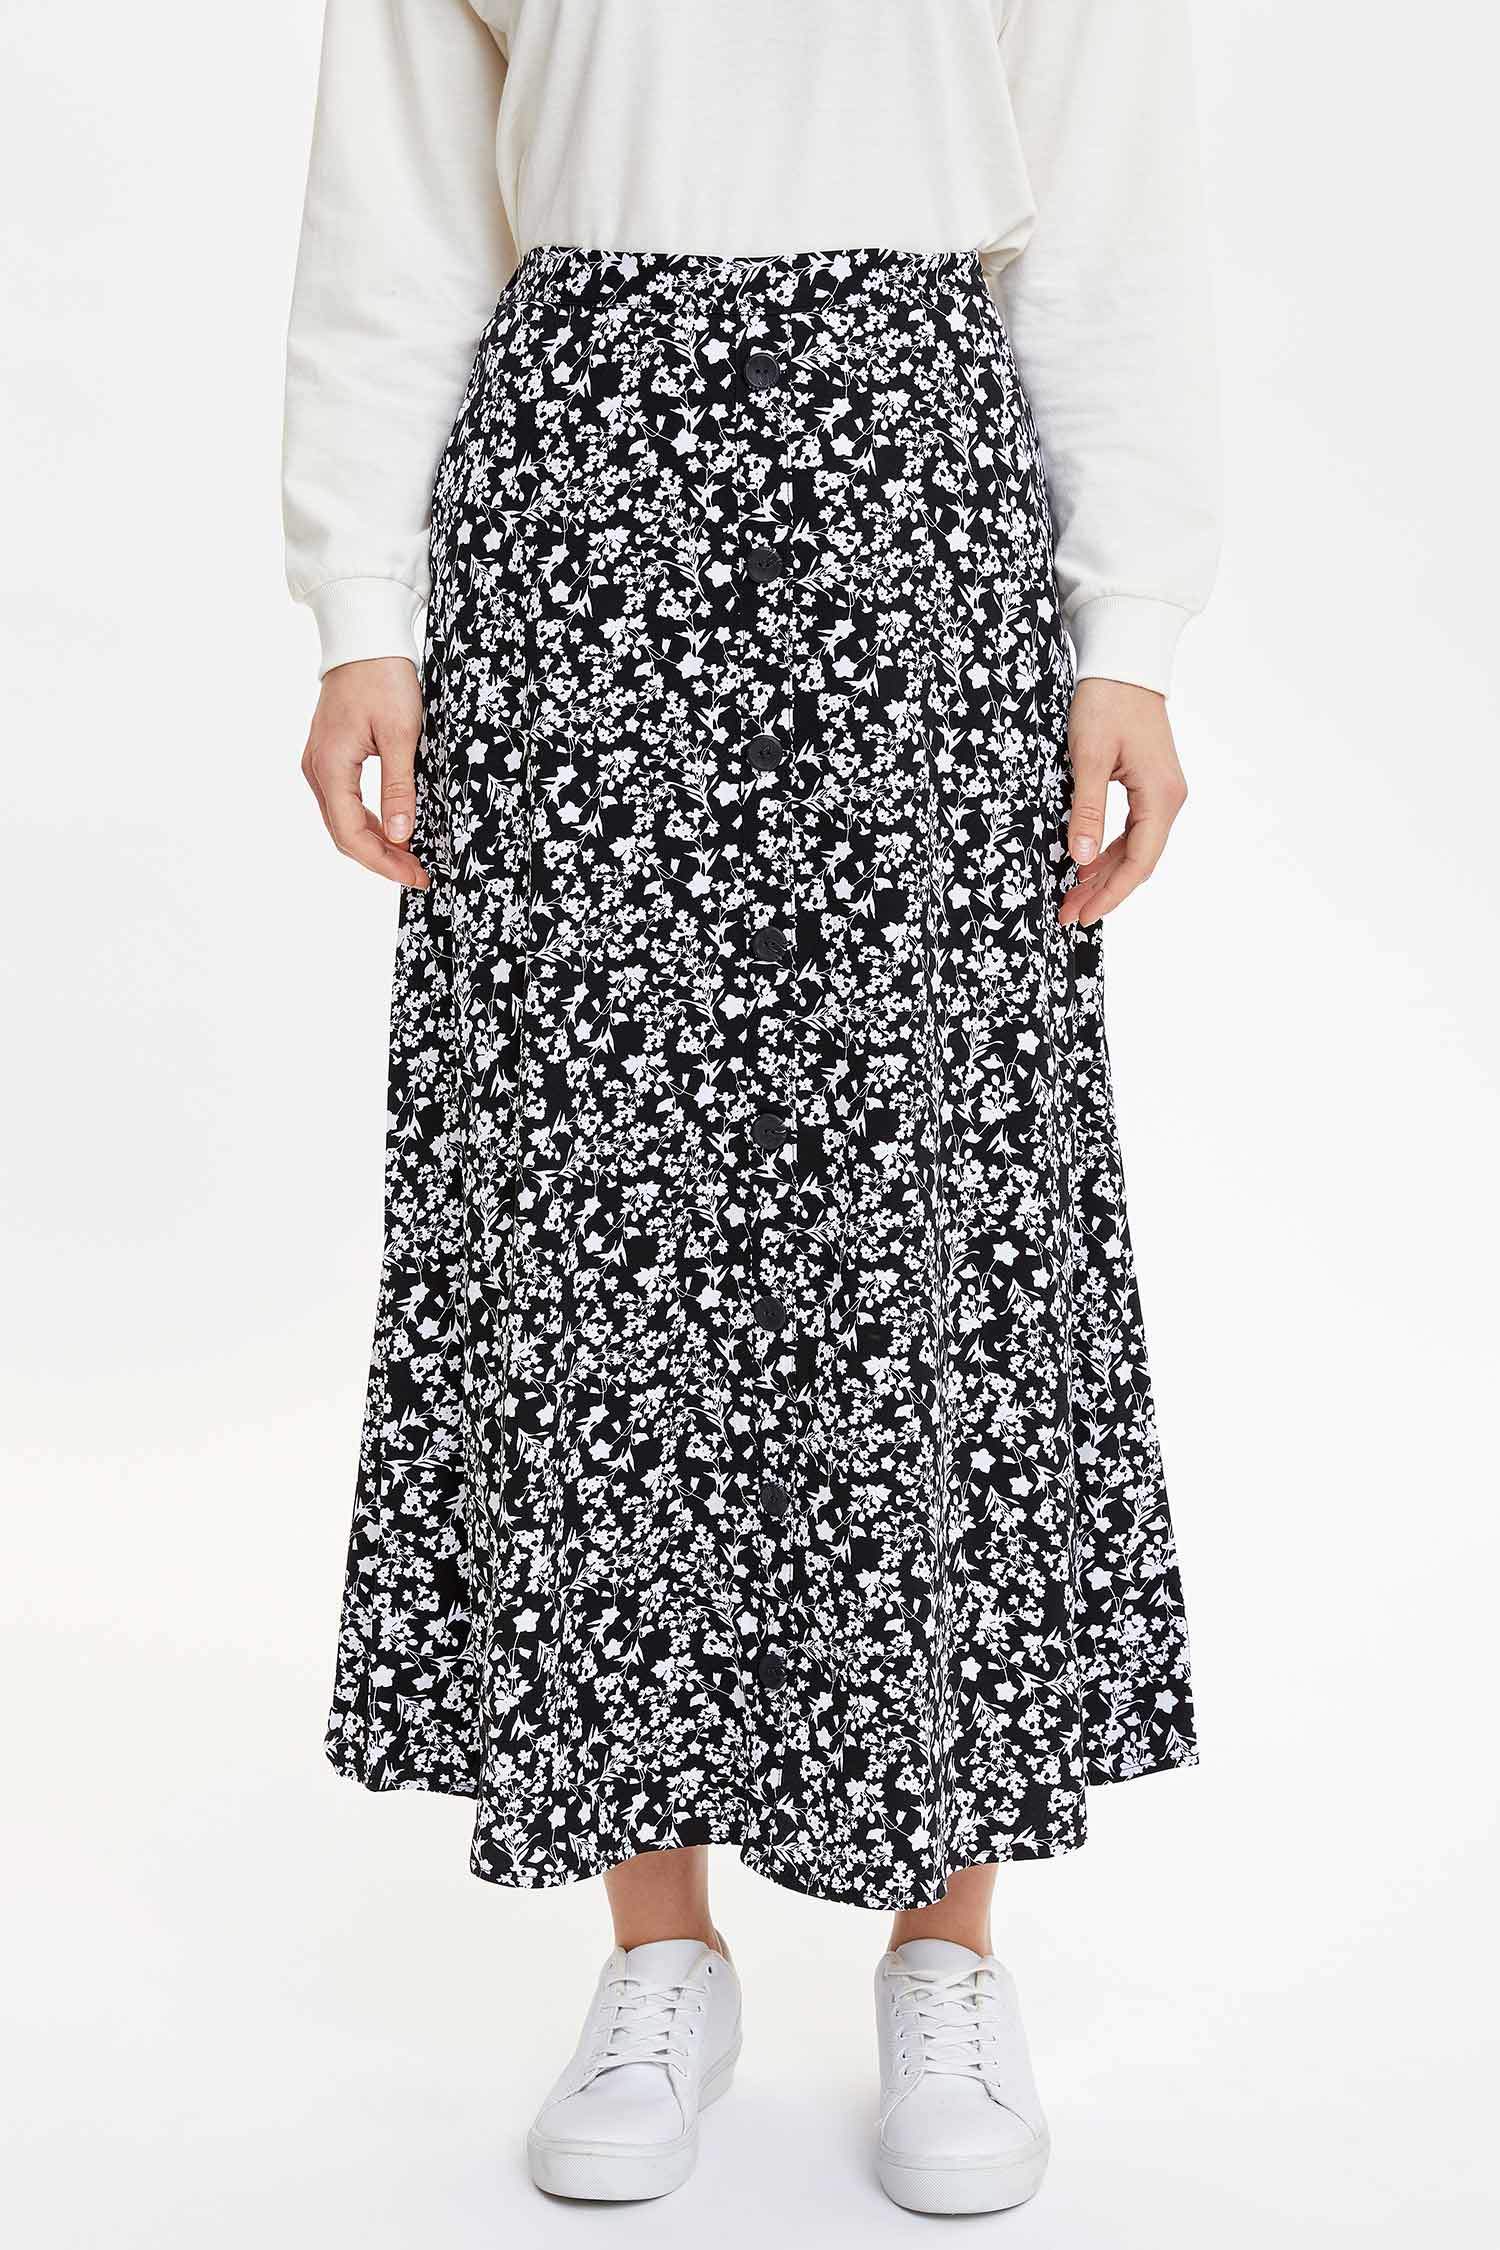 Black WOMAN Patterned Maxi Skirt With Button Detail 1141038 | DeFacto